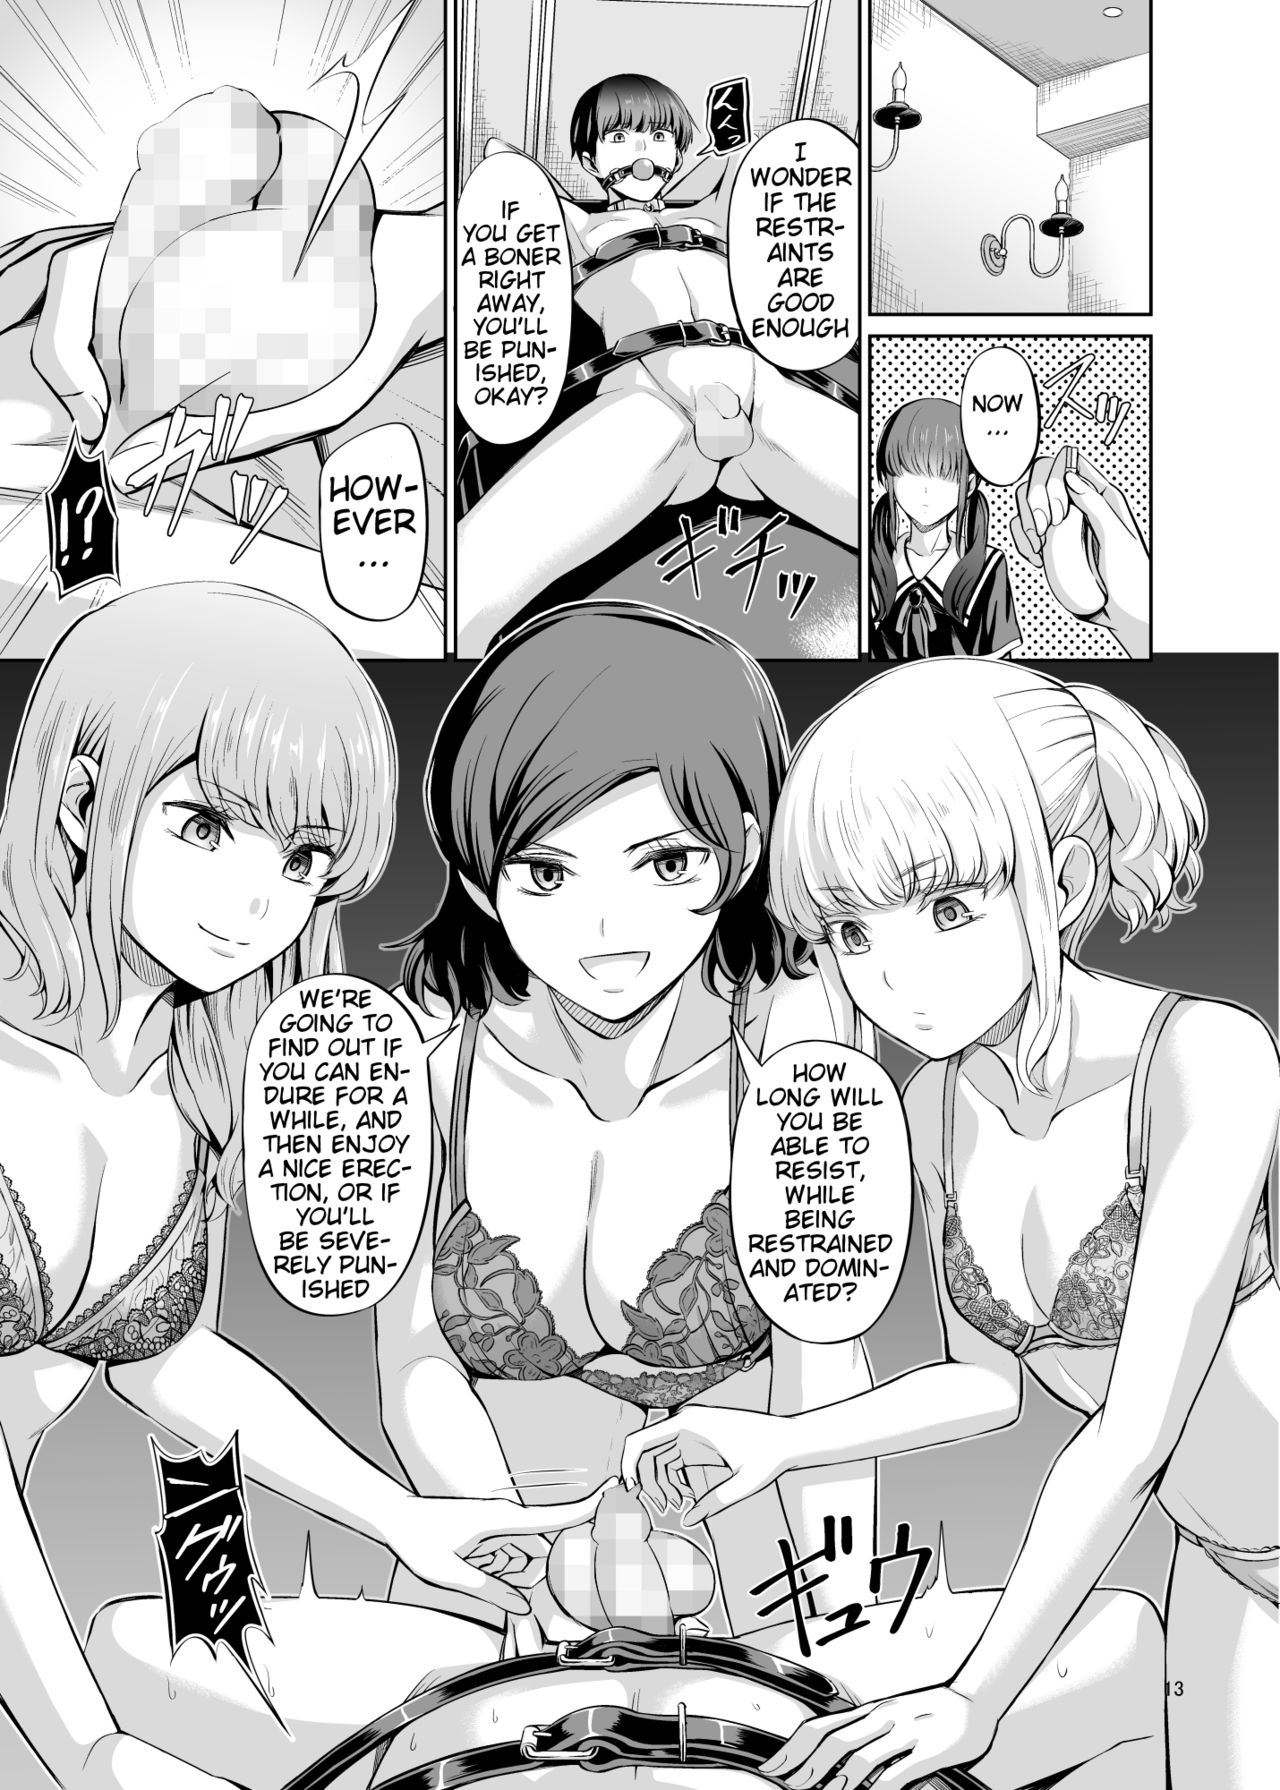 [Yamahata Rian] Tensuushugi no Kuni Kouhen | A Country Based on Point System Sequel [English] [Esoteric_Autist, klow82] page 15 full